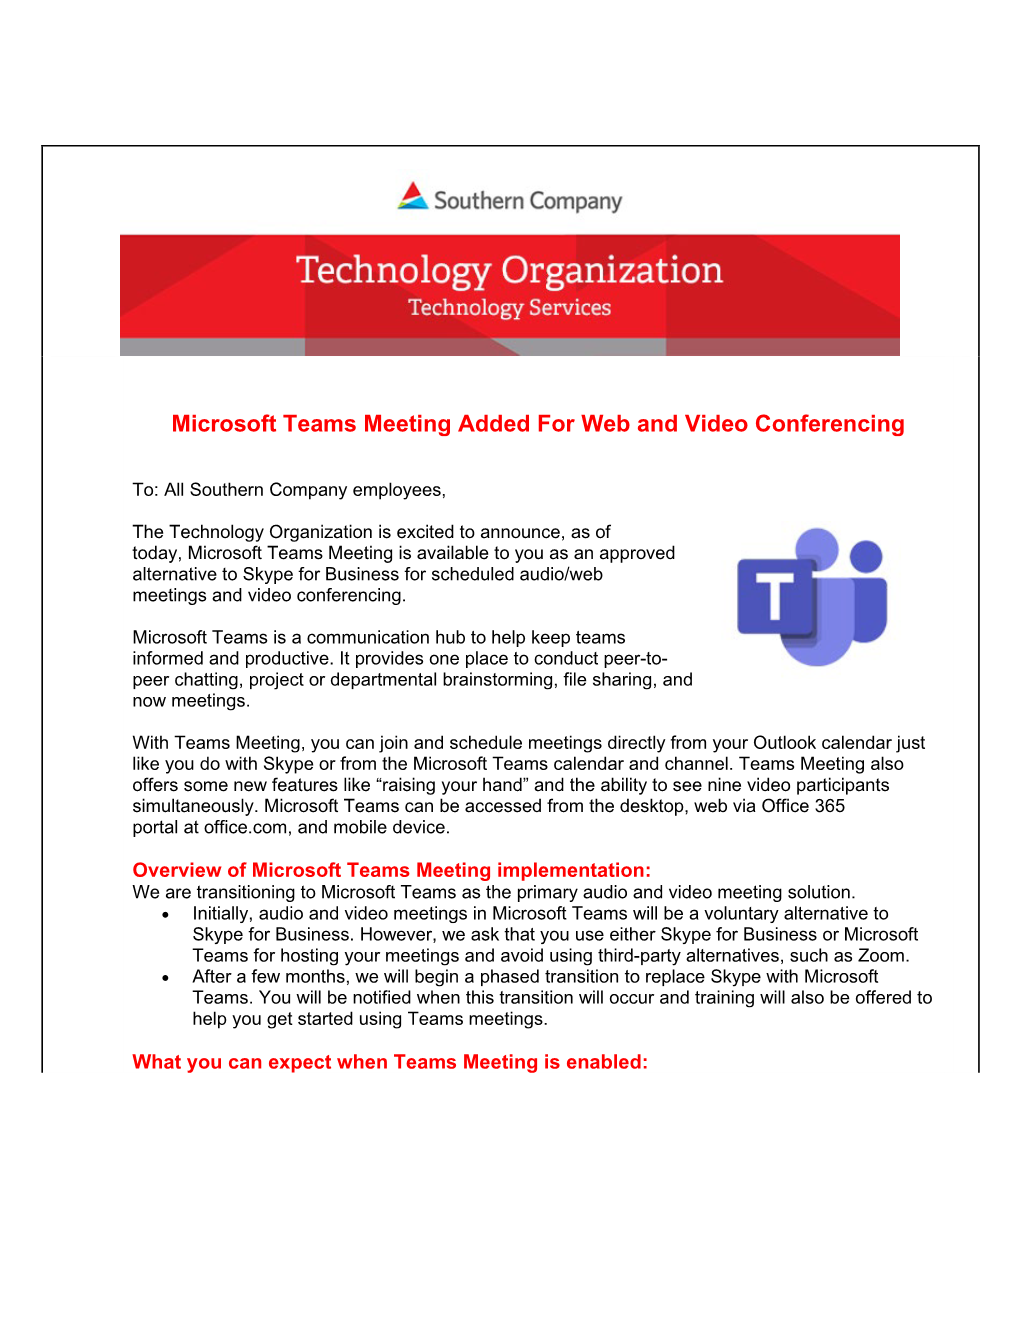 Microsoft Teams Meeting Added for Web and Video Conferencing